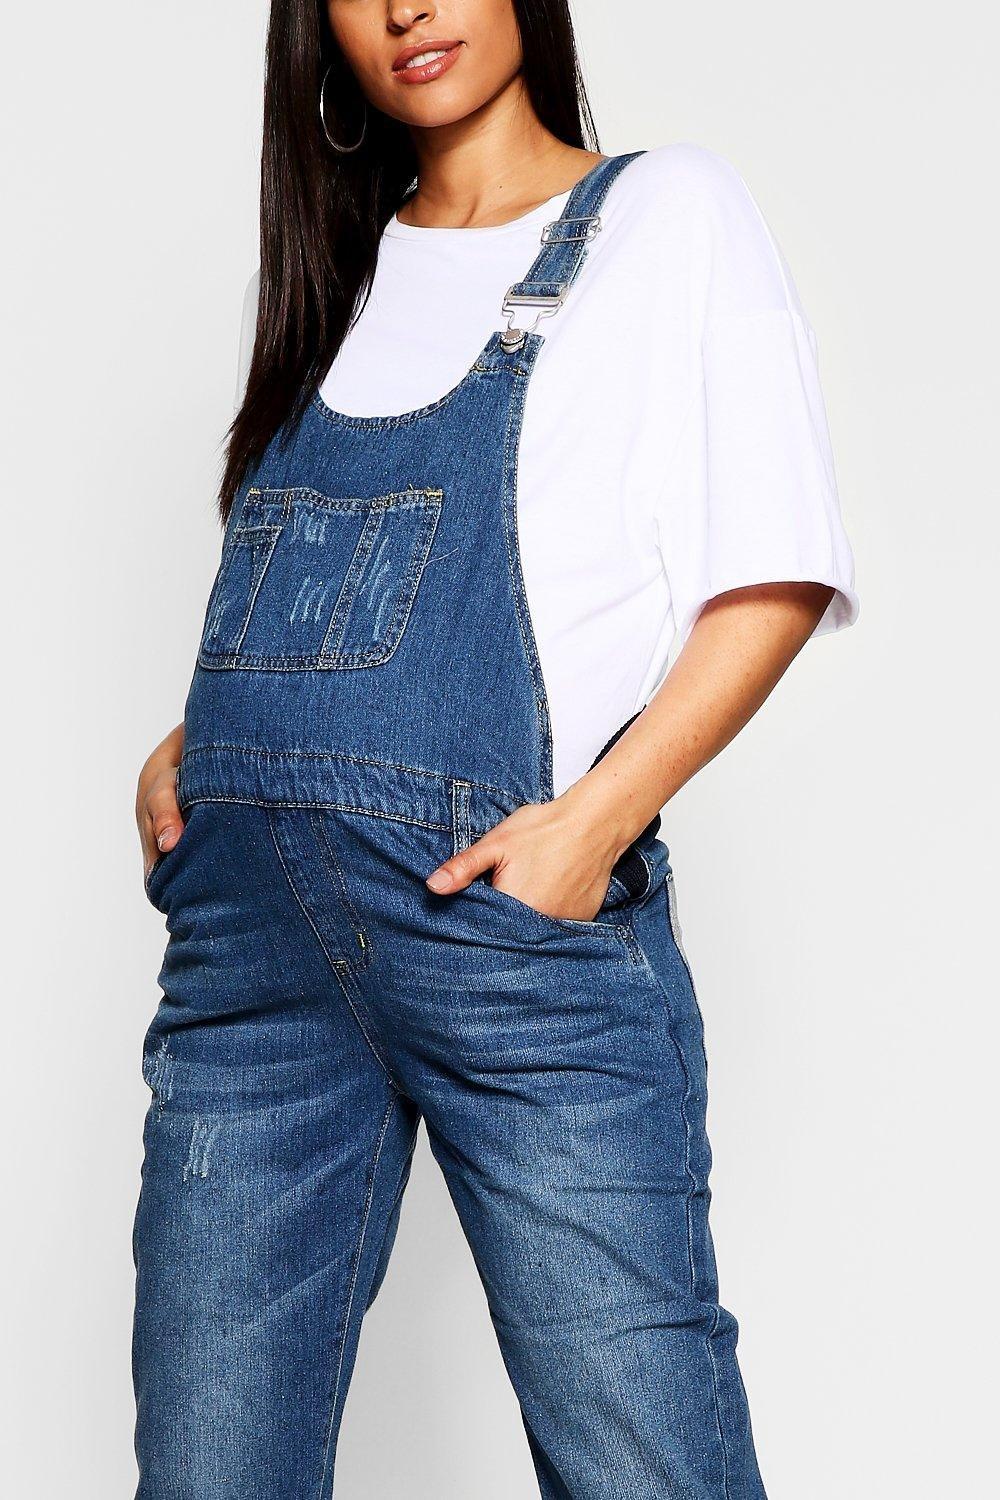 Womens Maternity Mid Wash Overalls Boohoo Women Clothing Dungarees 4 